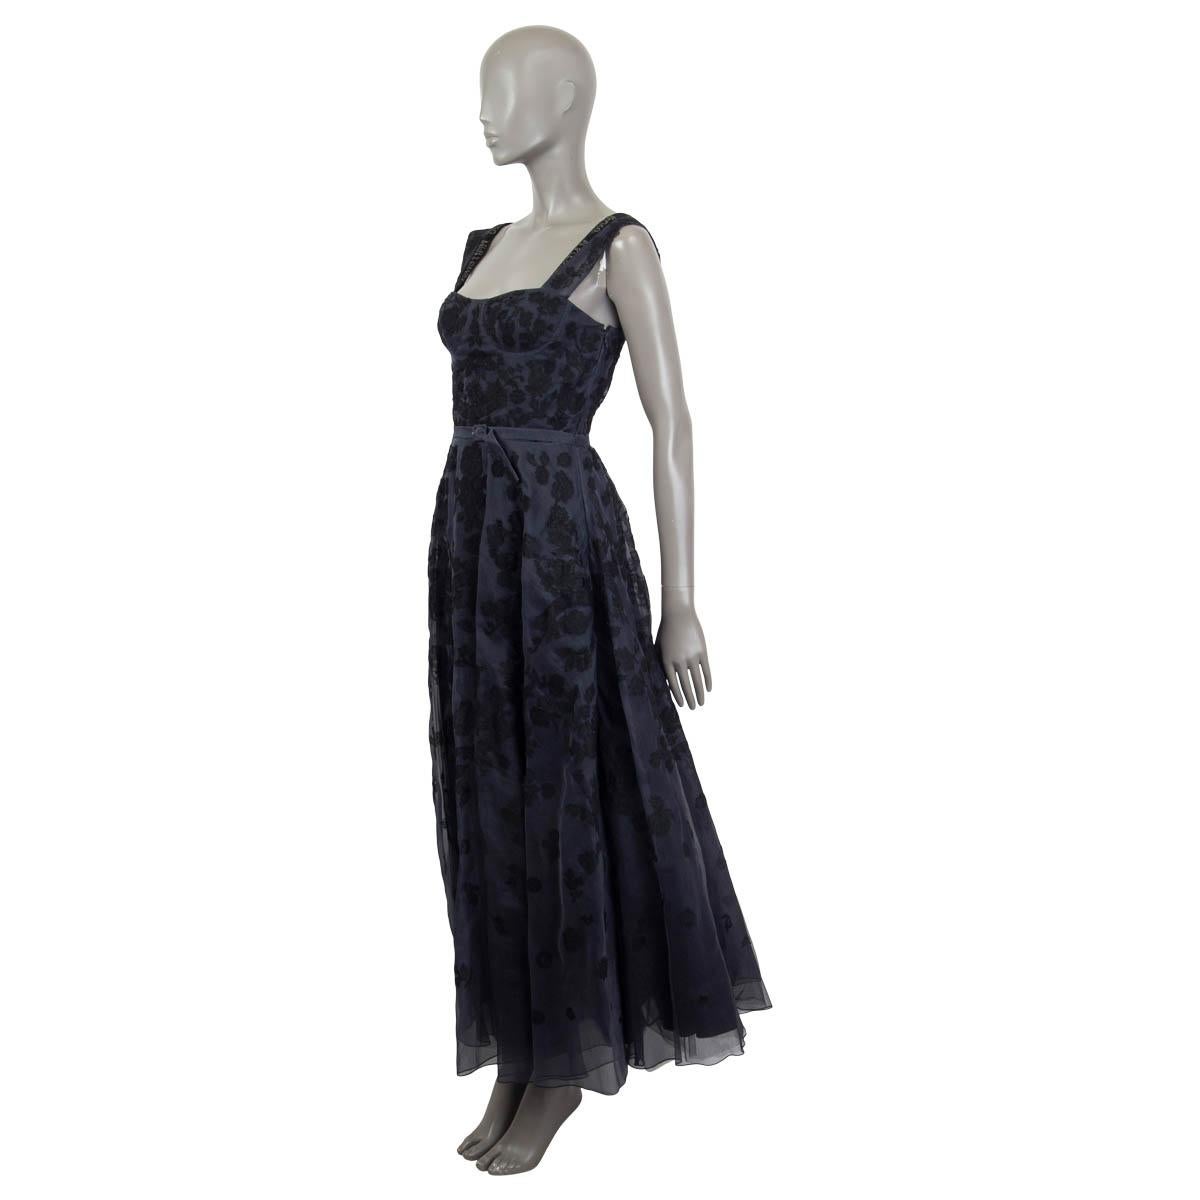 100% authentic Christian Dior Fall 2017 embroidered evening gown in navy blue and black silk (100%). Features a detachable belt and the brands name at the shoulder straps. Opens with a hook and a concealed zipper at the side. Lined in navy blue silk